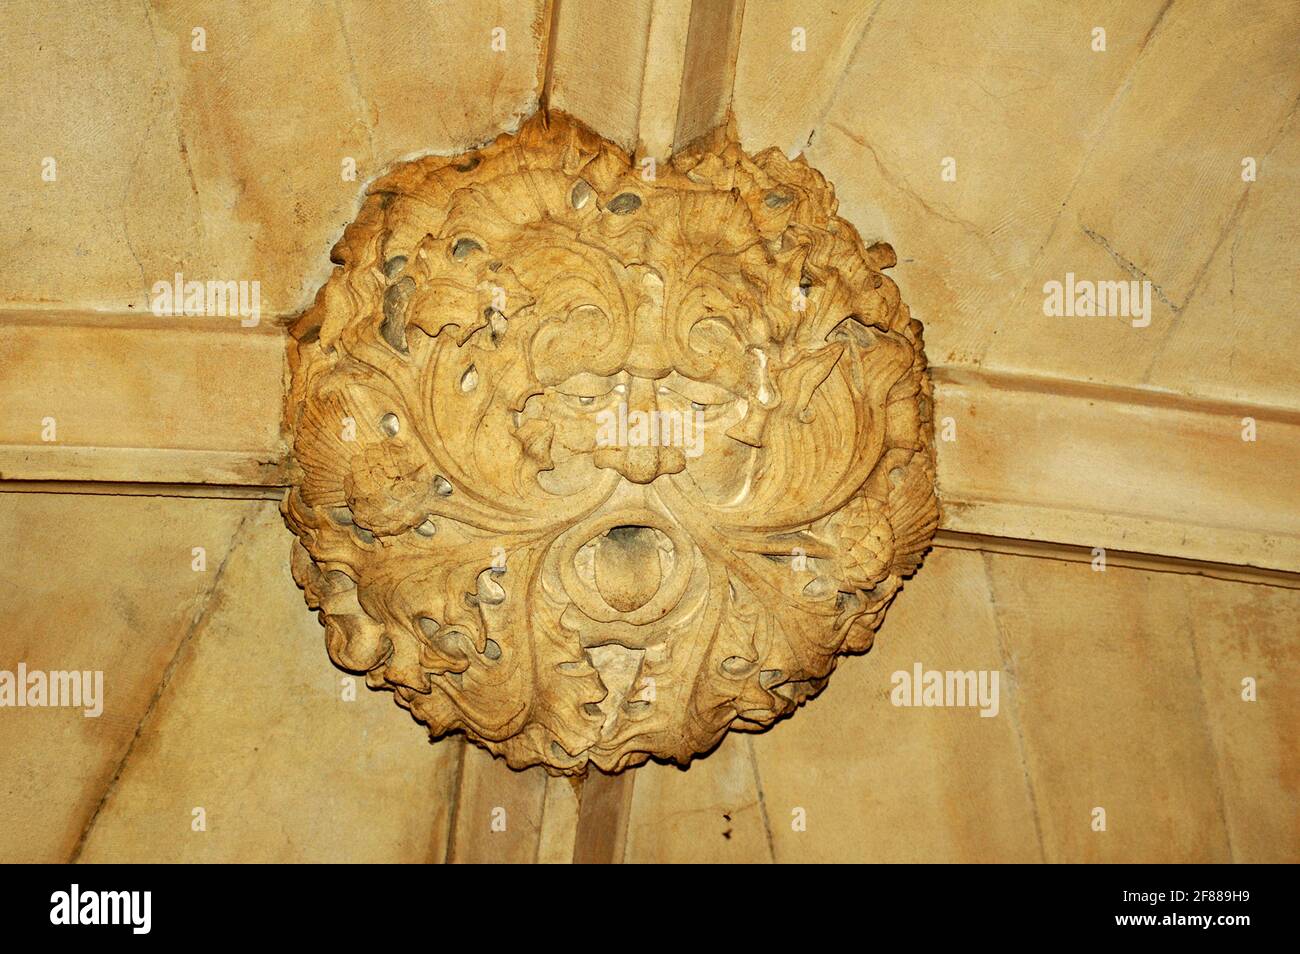 Sculpture of Jack-in-the-green, or The Green Man, in the ceiling of the main entrance of Mansfield College, Oxford. Stock Photo